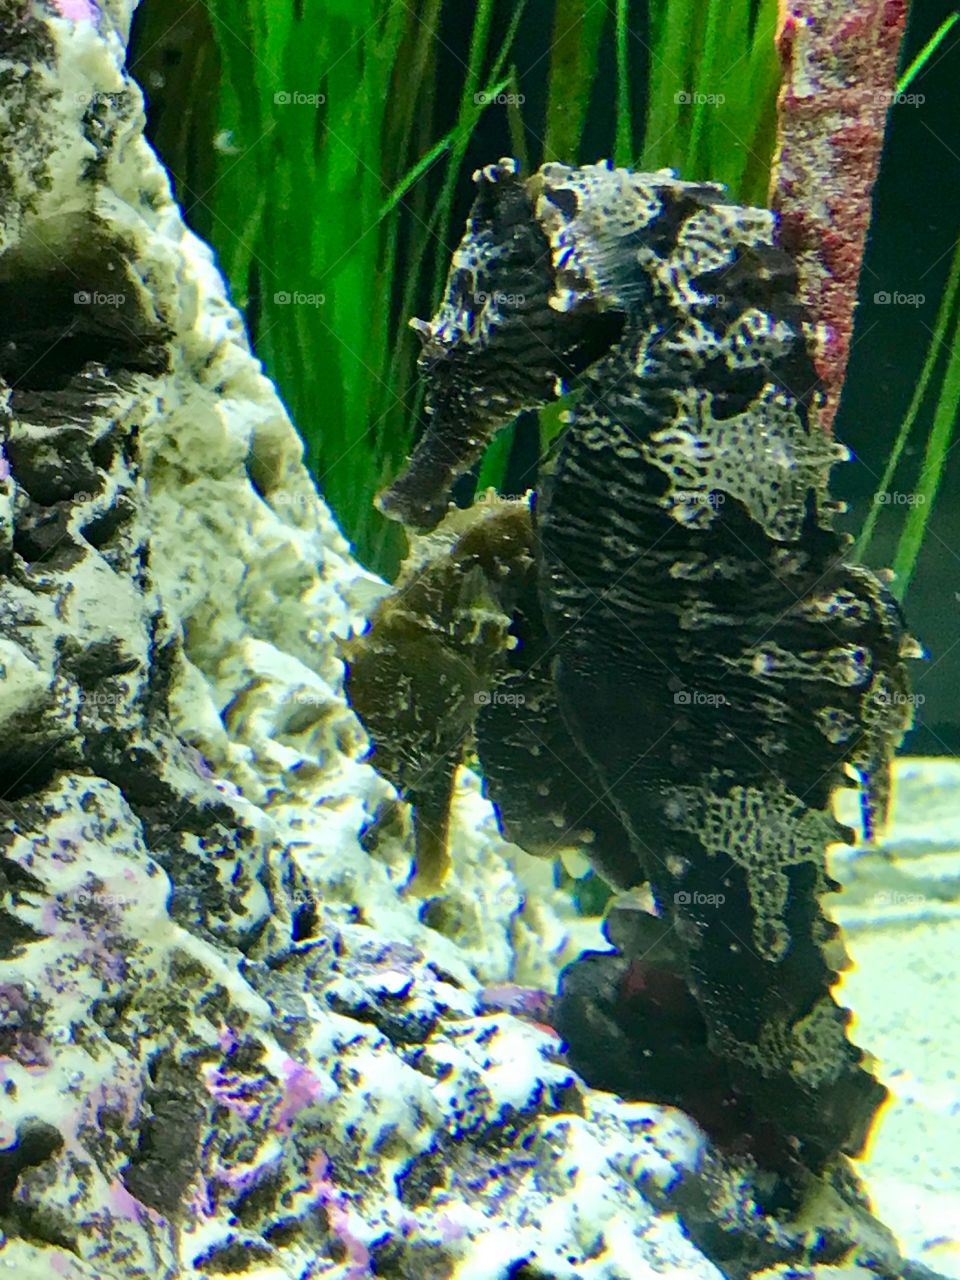 The incredible little seahorse 